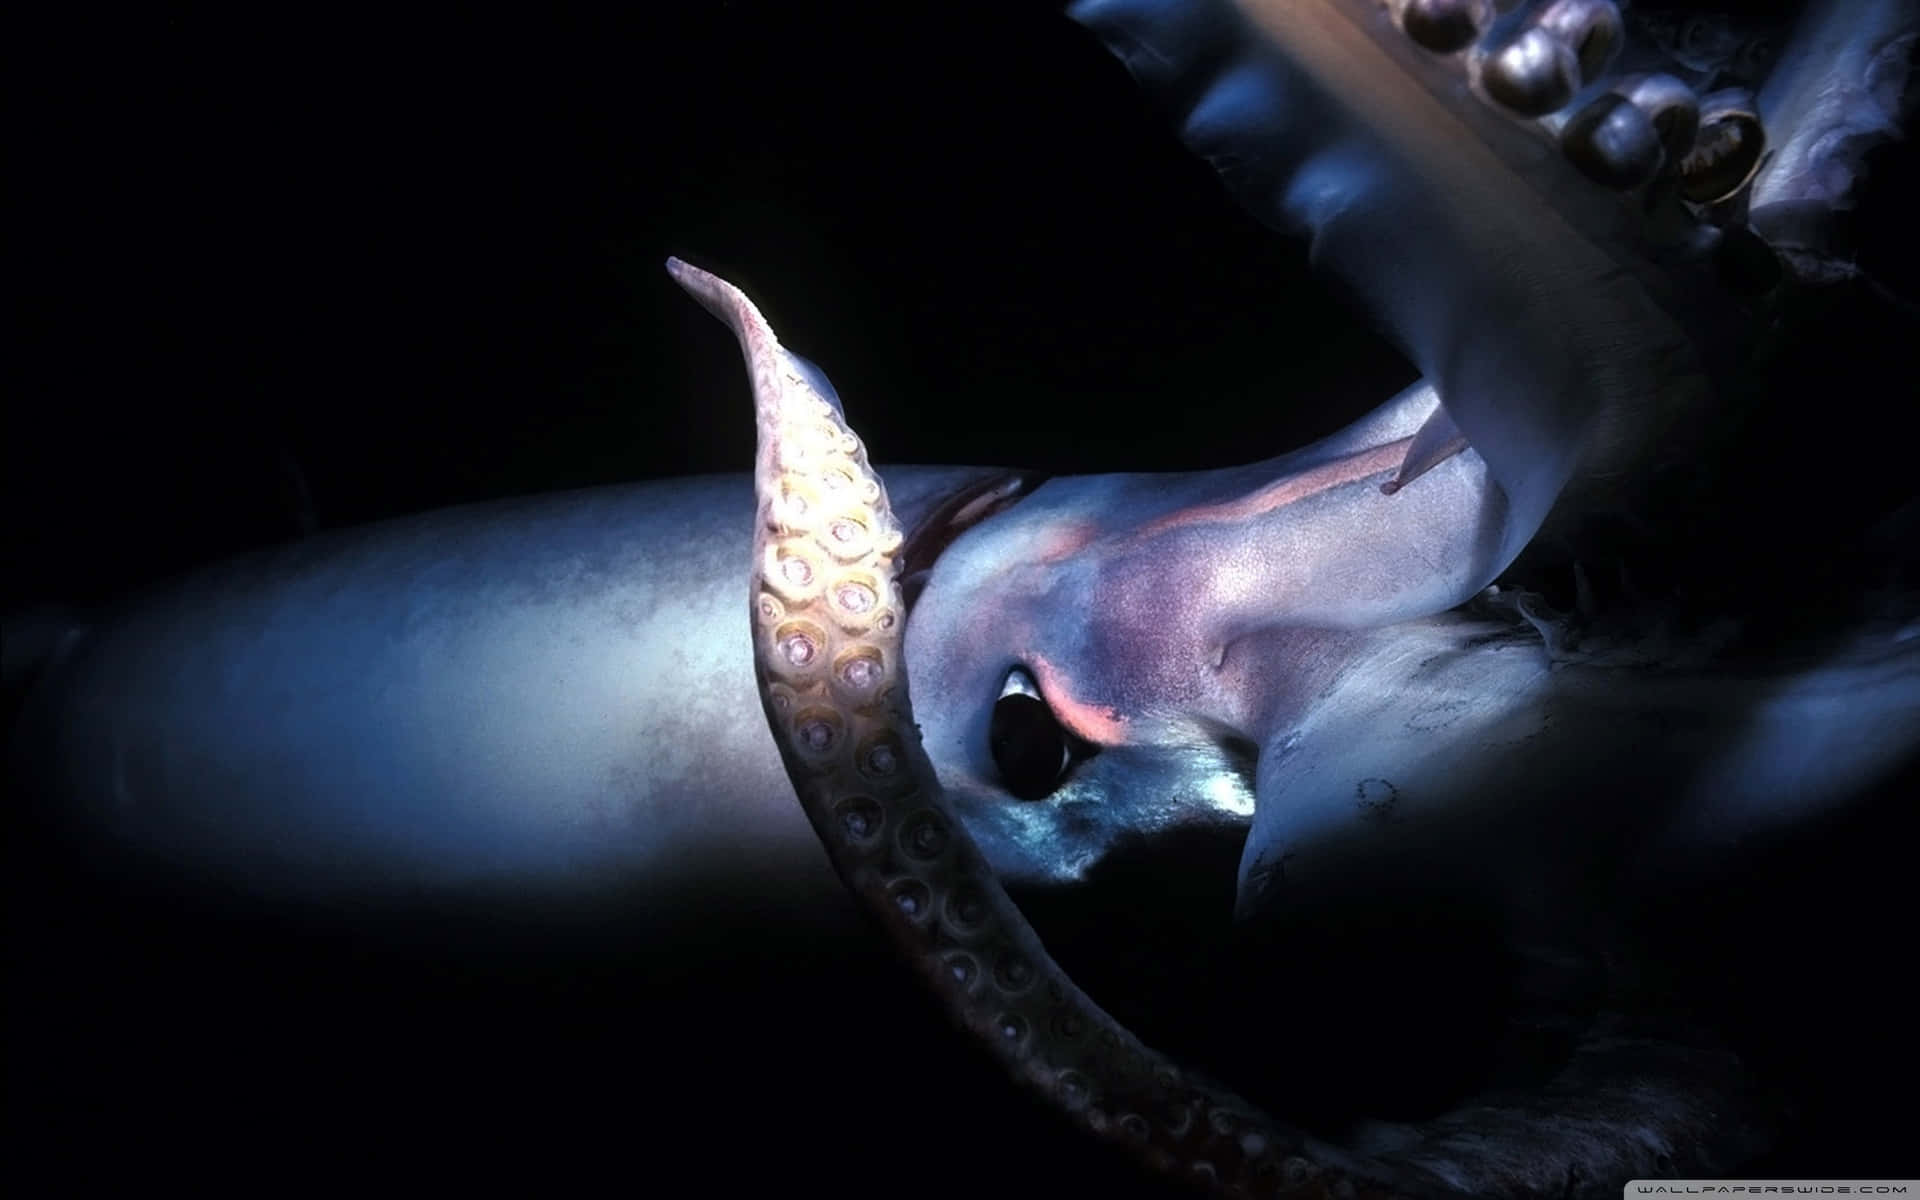 "A View of a Giant Squid from the Deep"